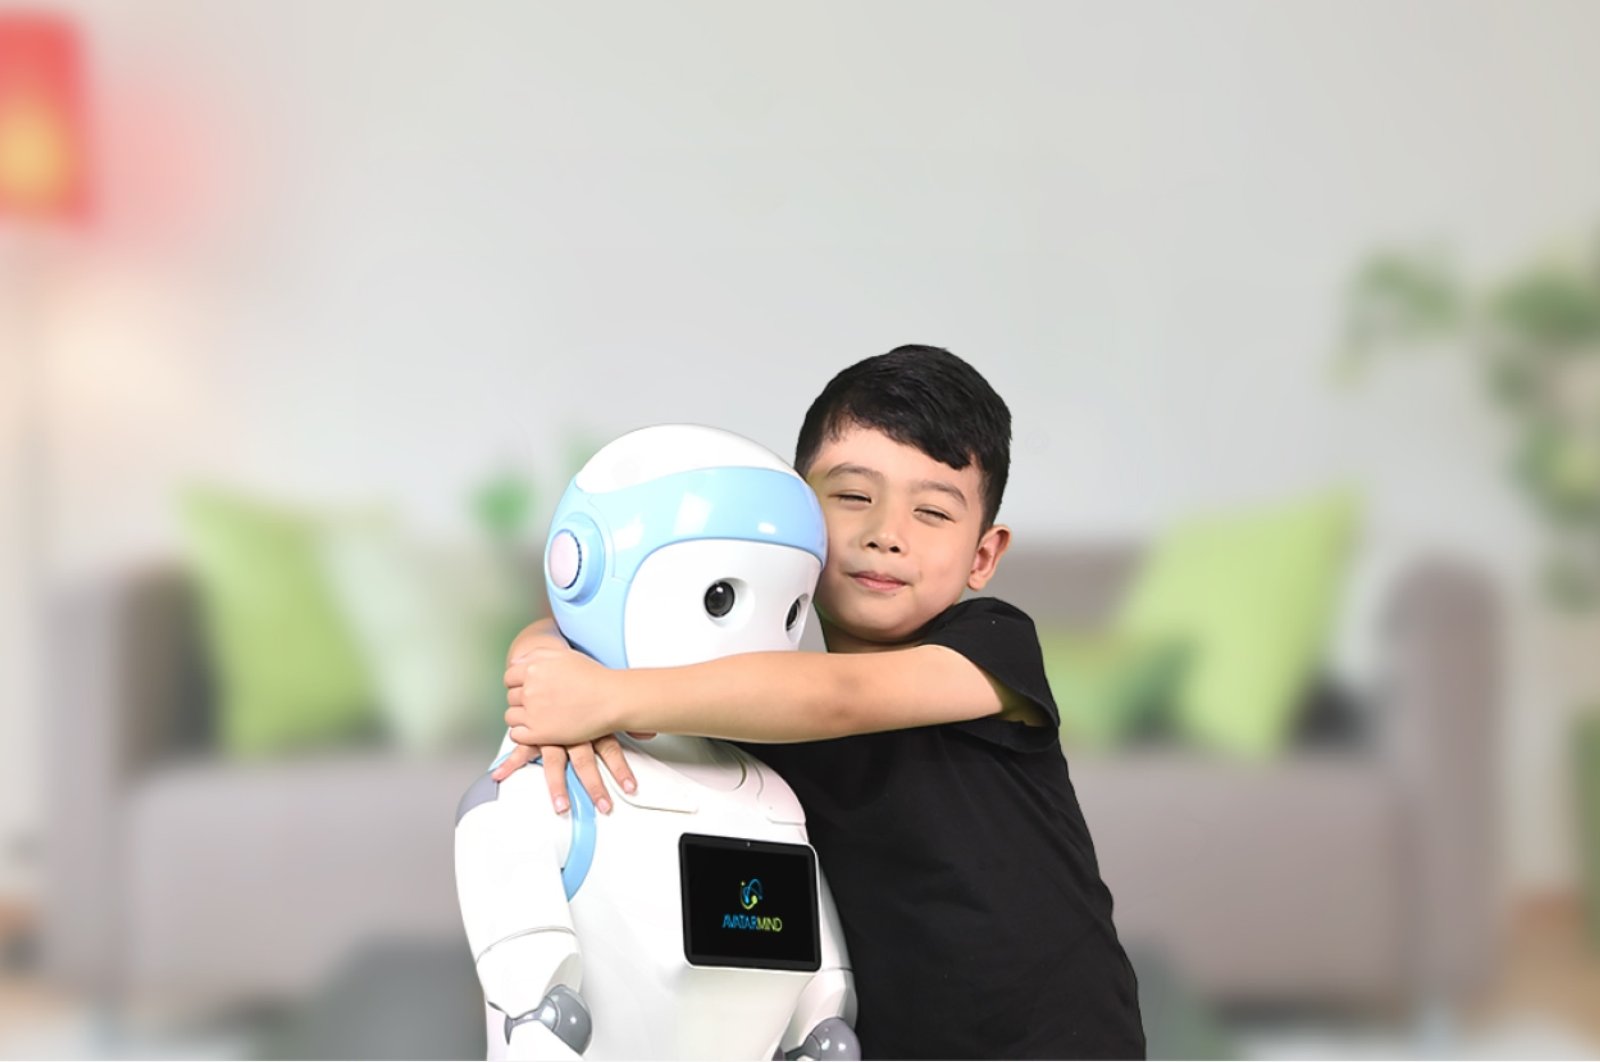 Research has found that children are sometimes more willing to confide in child-sized humanoid robots than in humans or computers in other settings. (dpa Photo)